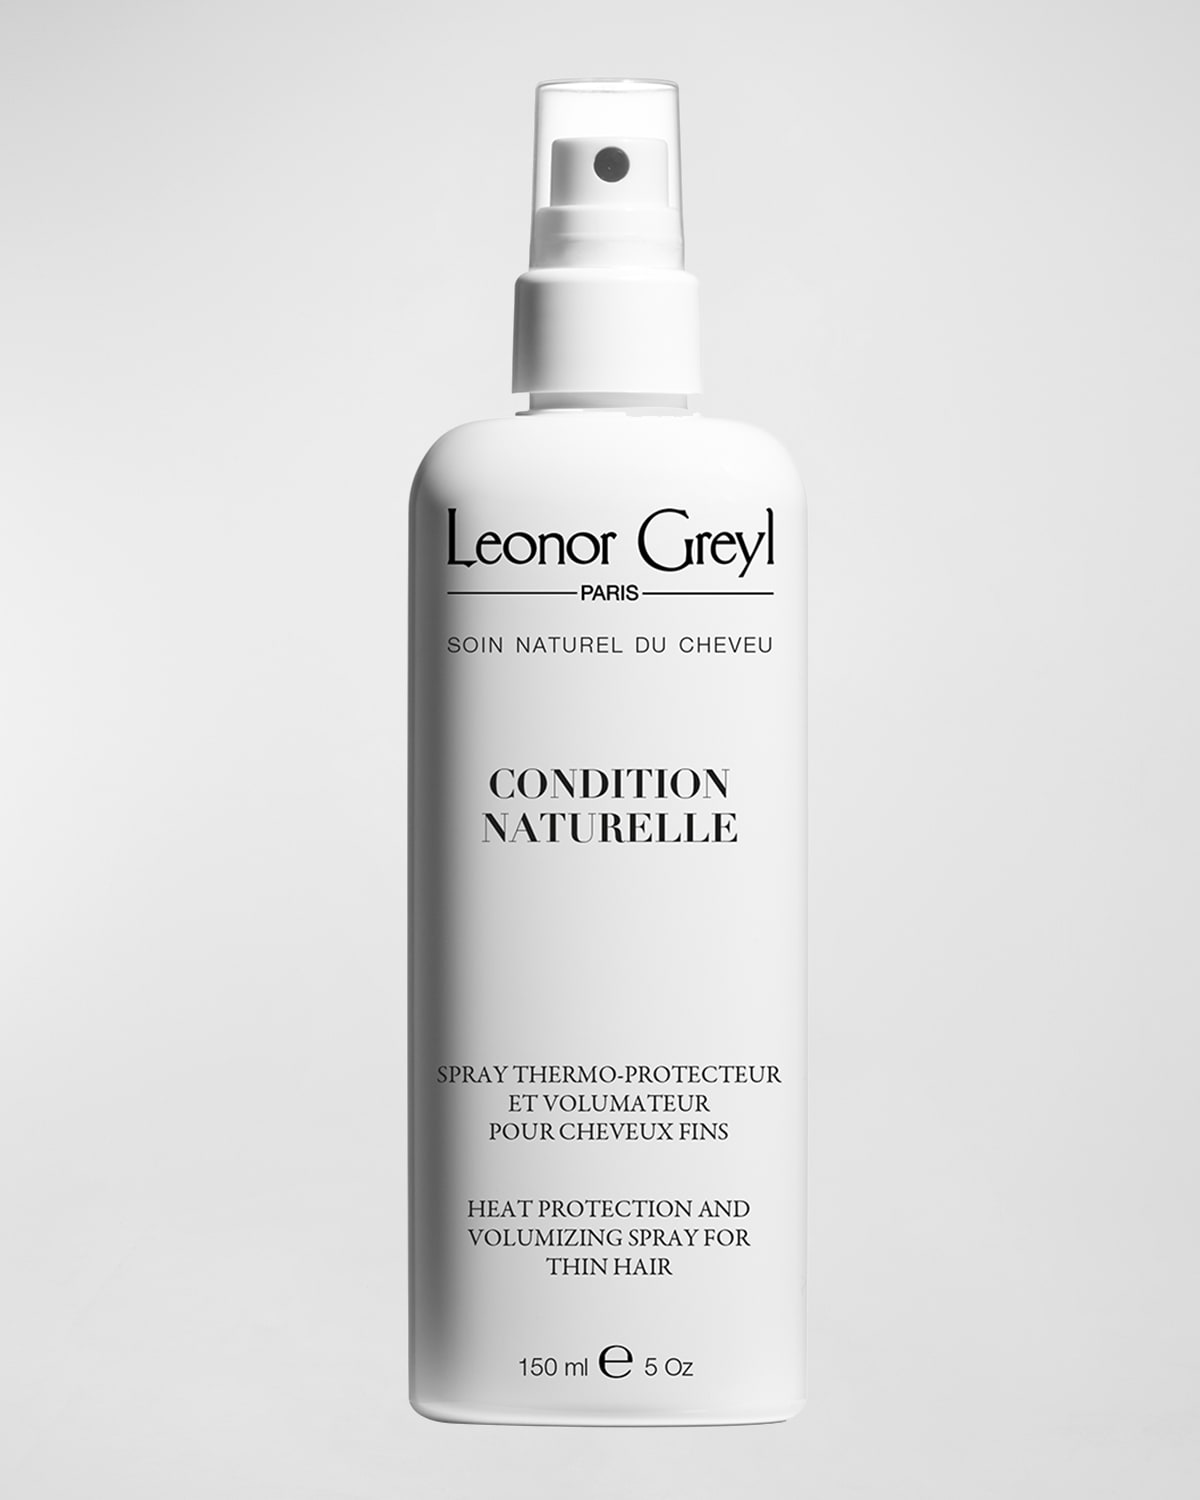 Condition Naturelle (Heat Protecting Volumizing Styling Spray for Thin Hair),5.2 oz./ 150 mL